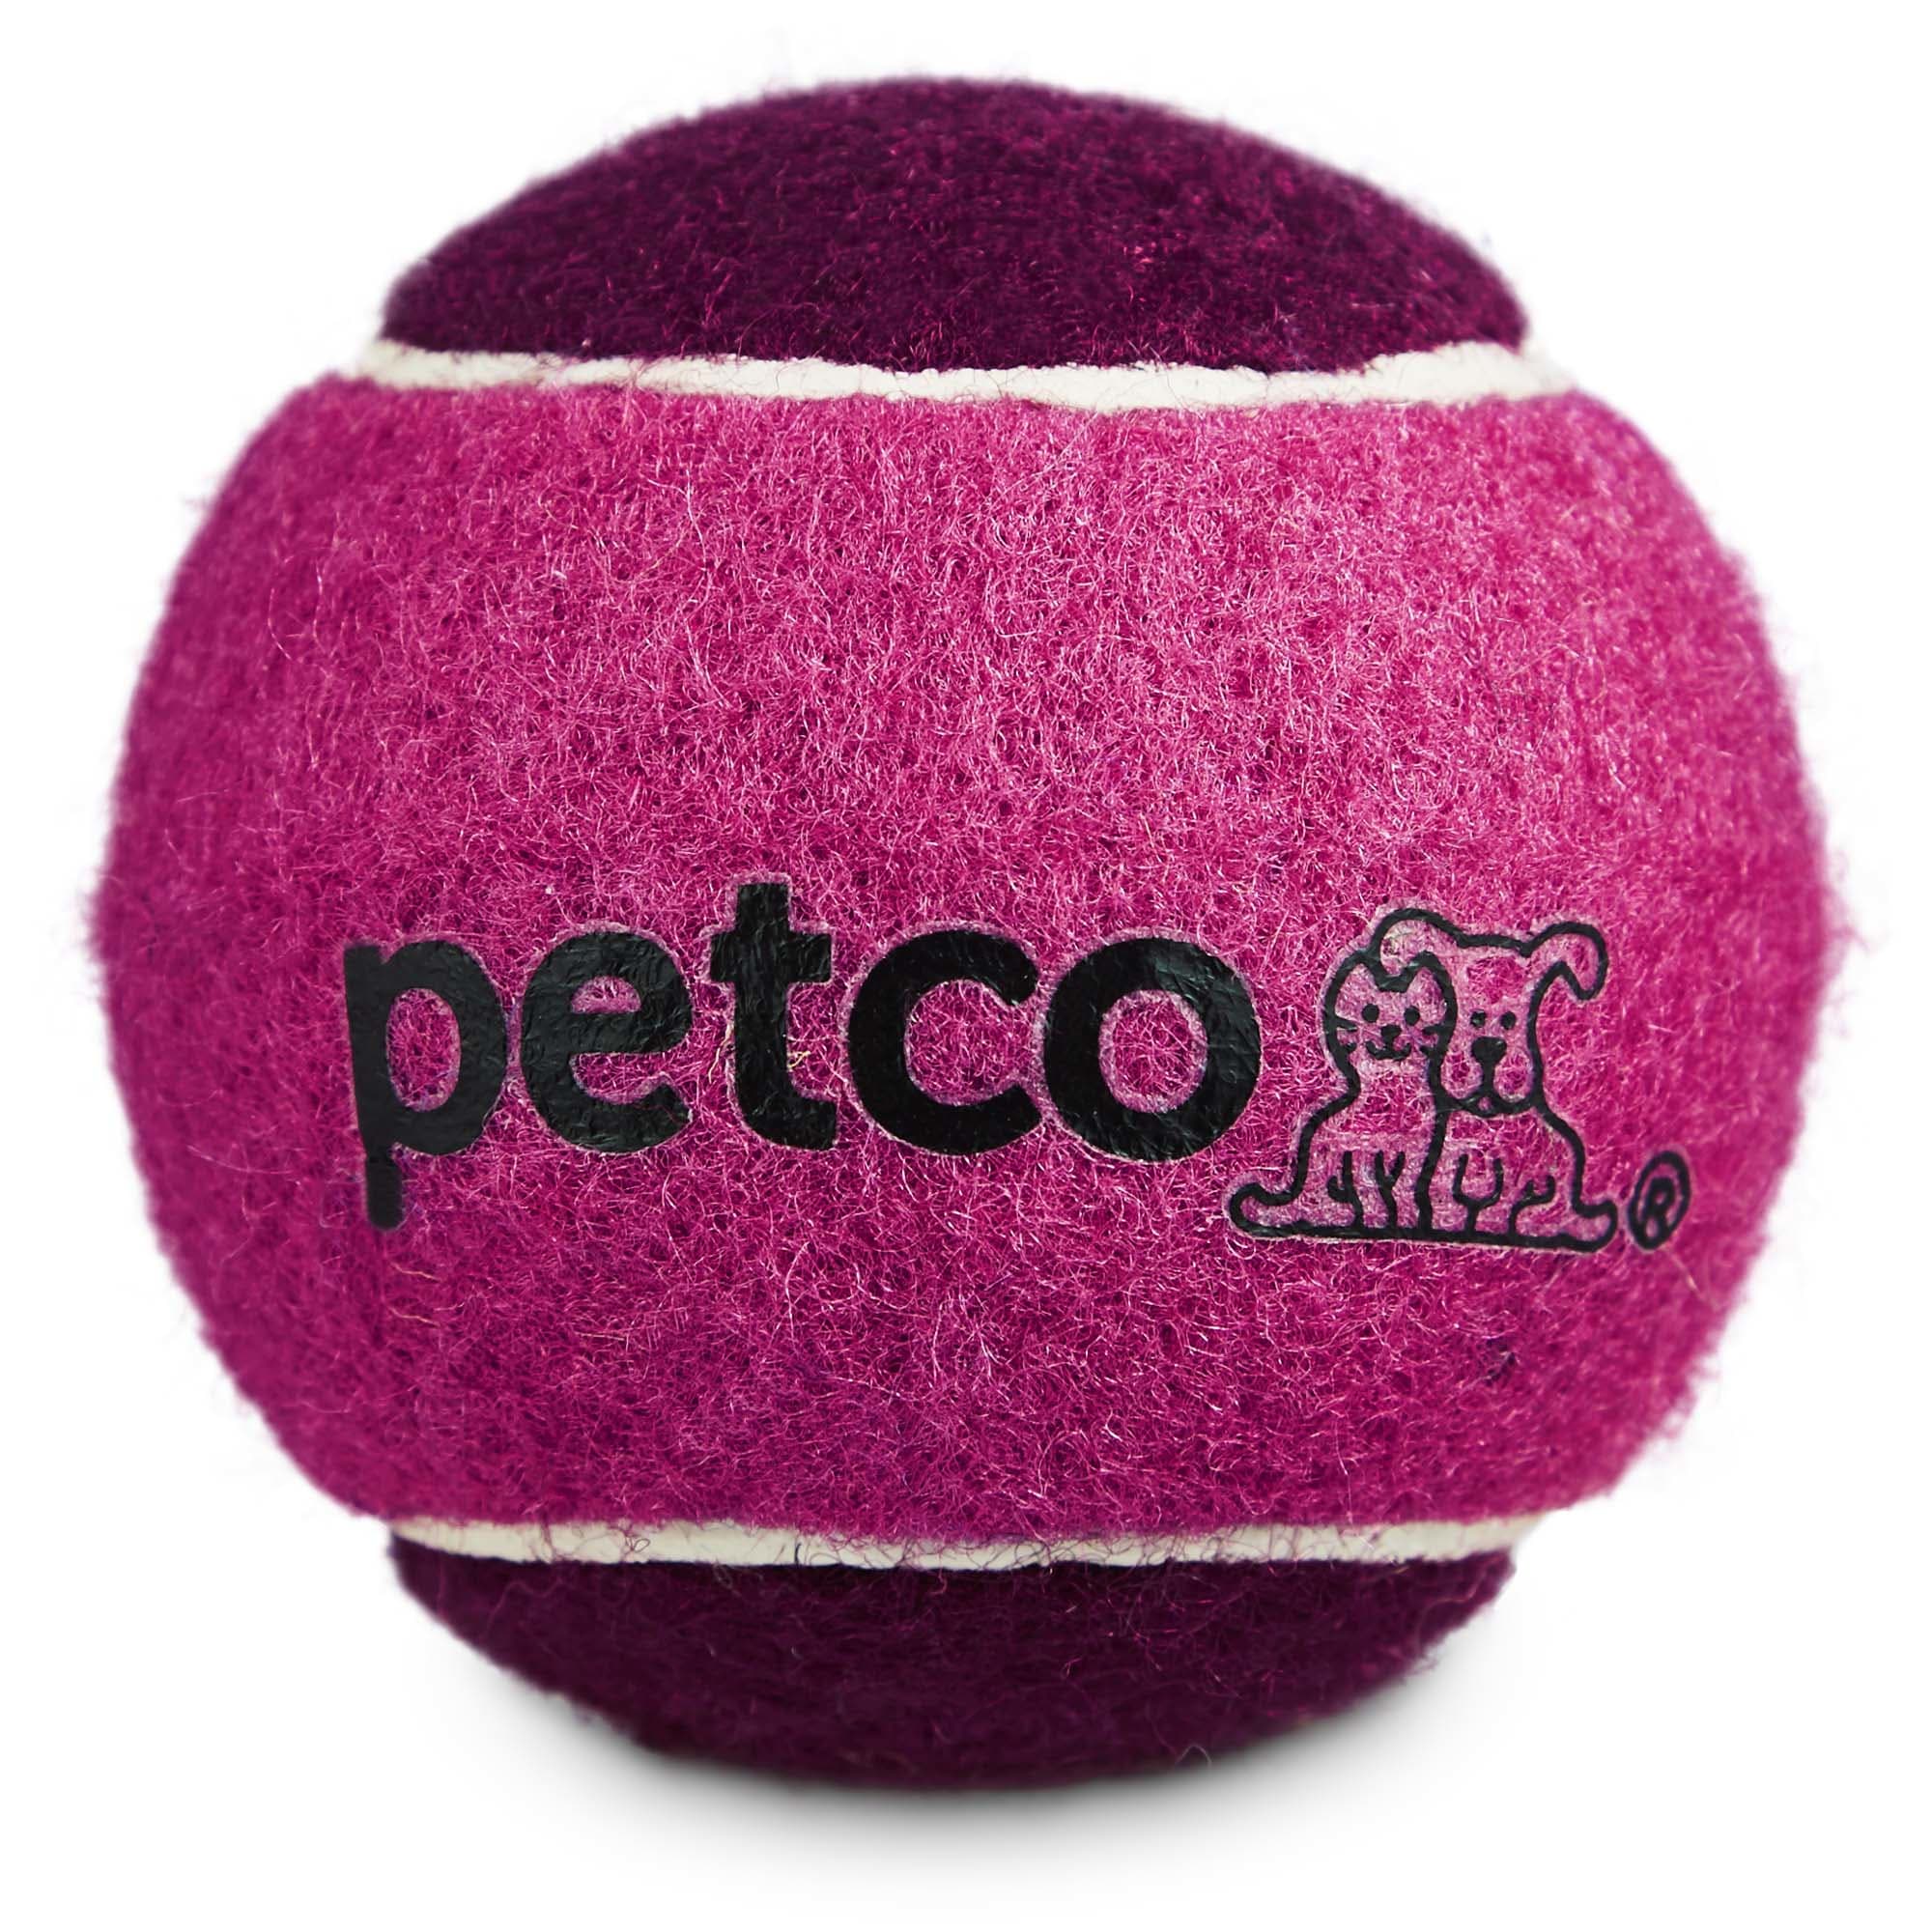 Petco Tennis Ball Dog Toy in Pink, 2.5 